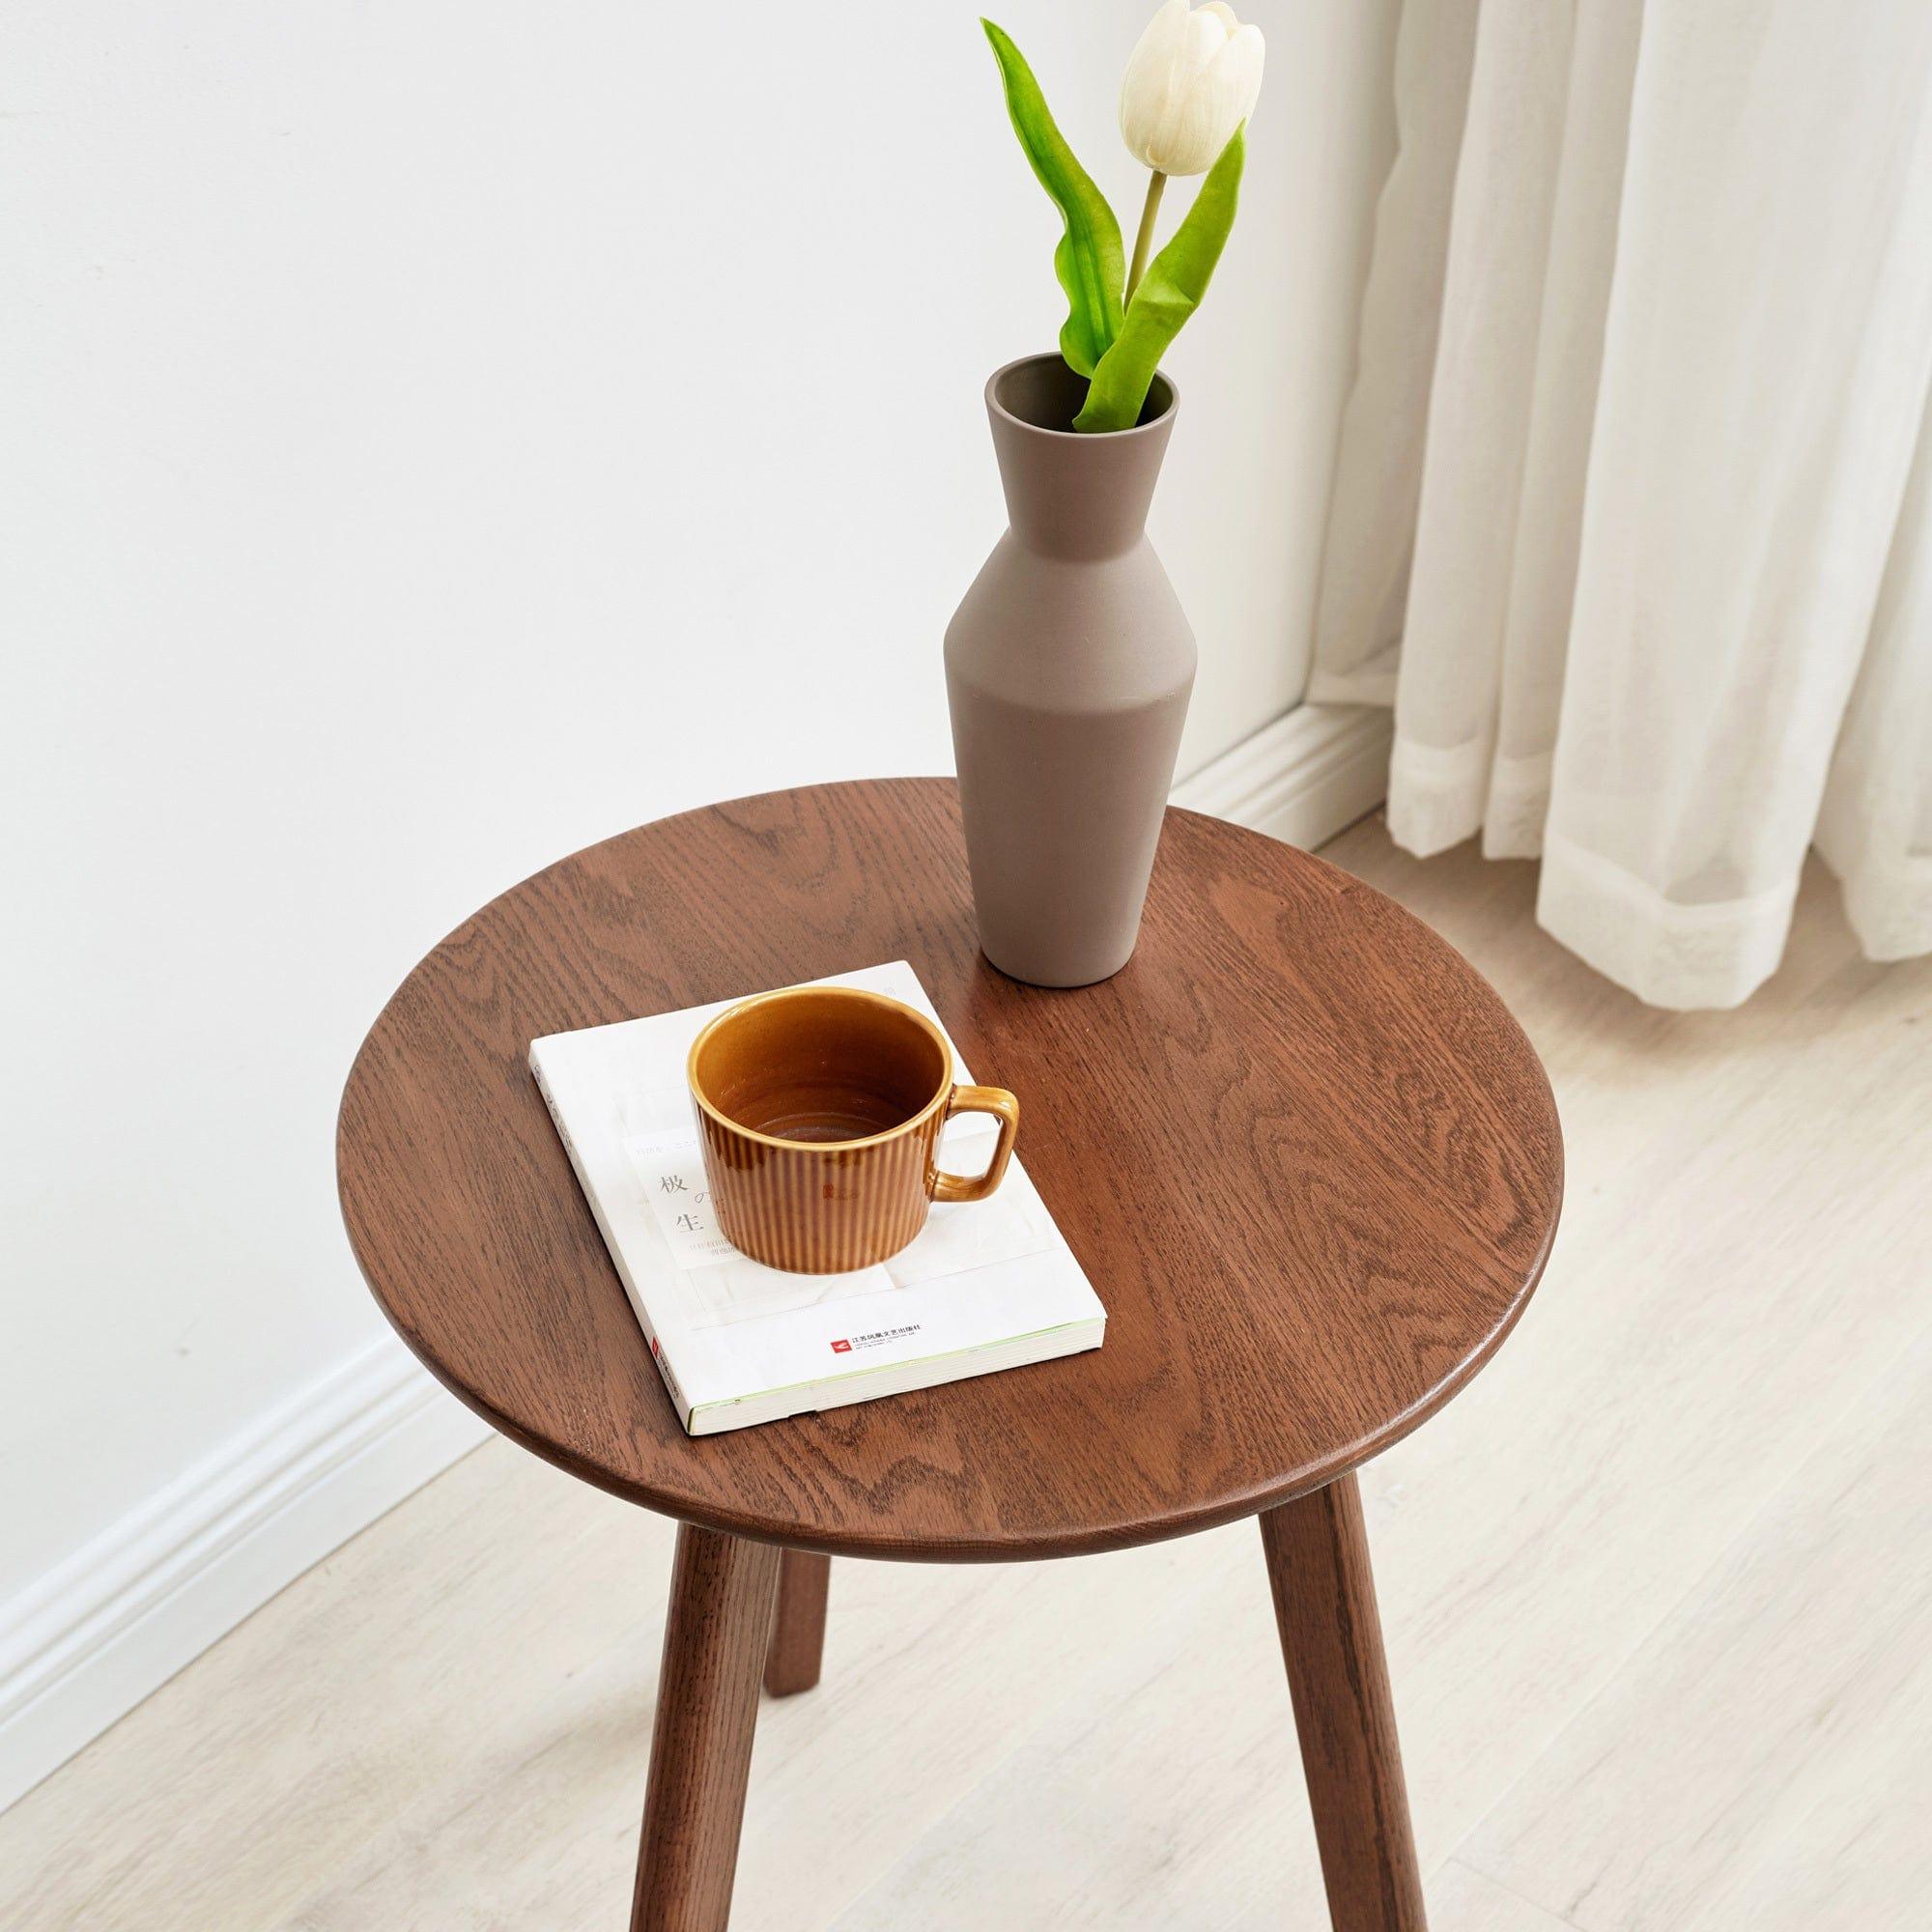 Shop Round End Table- Small End Table Side Table Coffee Table Bedside Table Night Stand for Living Room Bedroom & Balcony, 100% Natural Solid Oak Wood Easy to Assemble Mademoiselle Home Decor